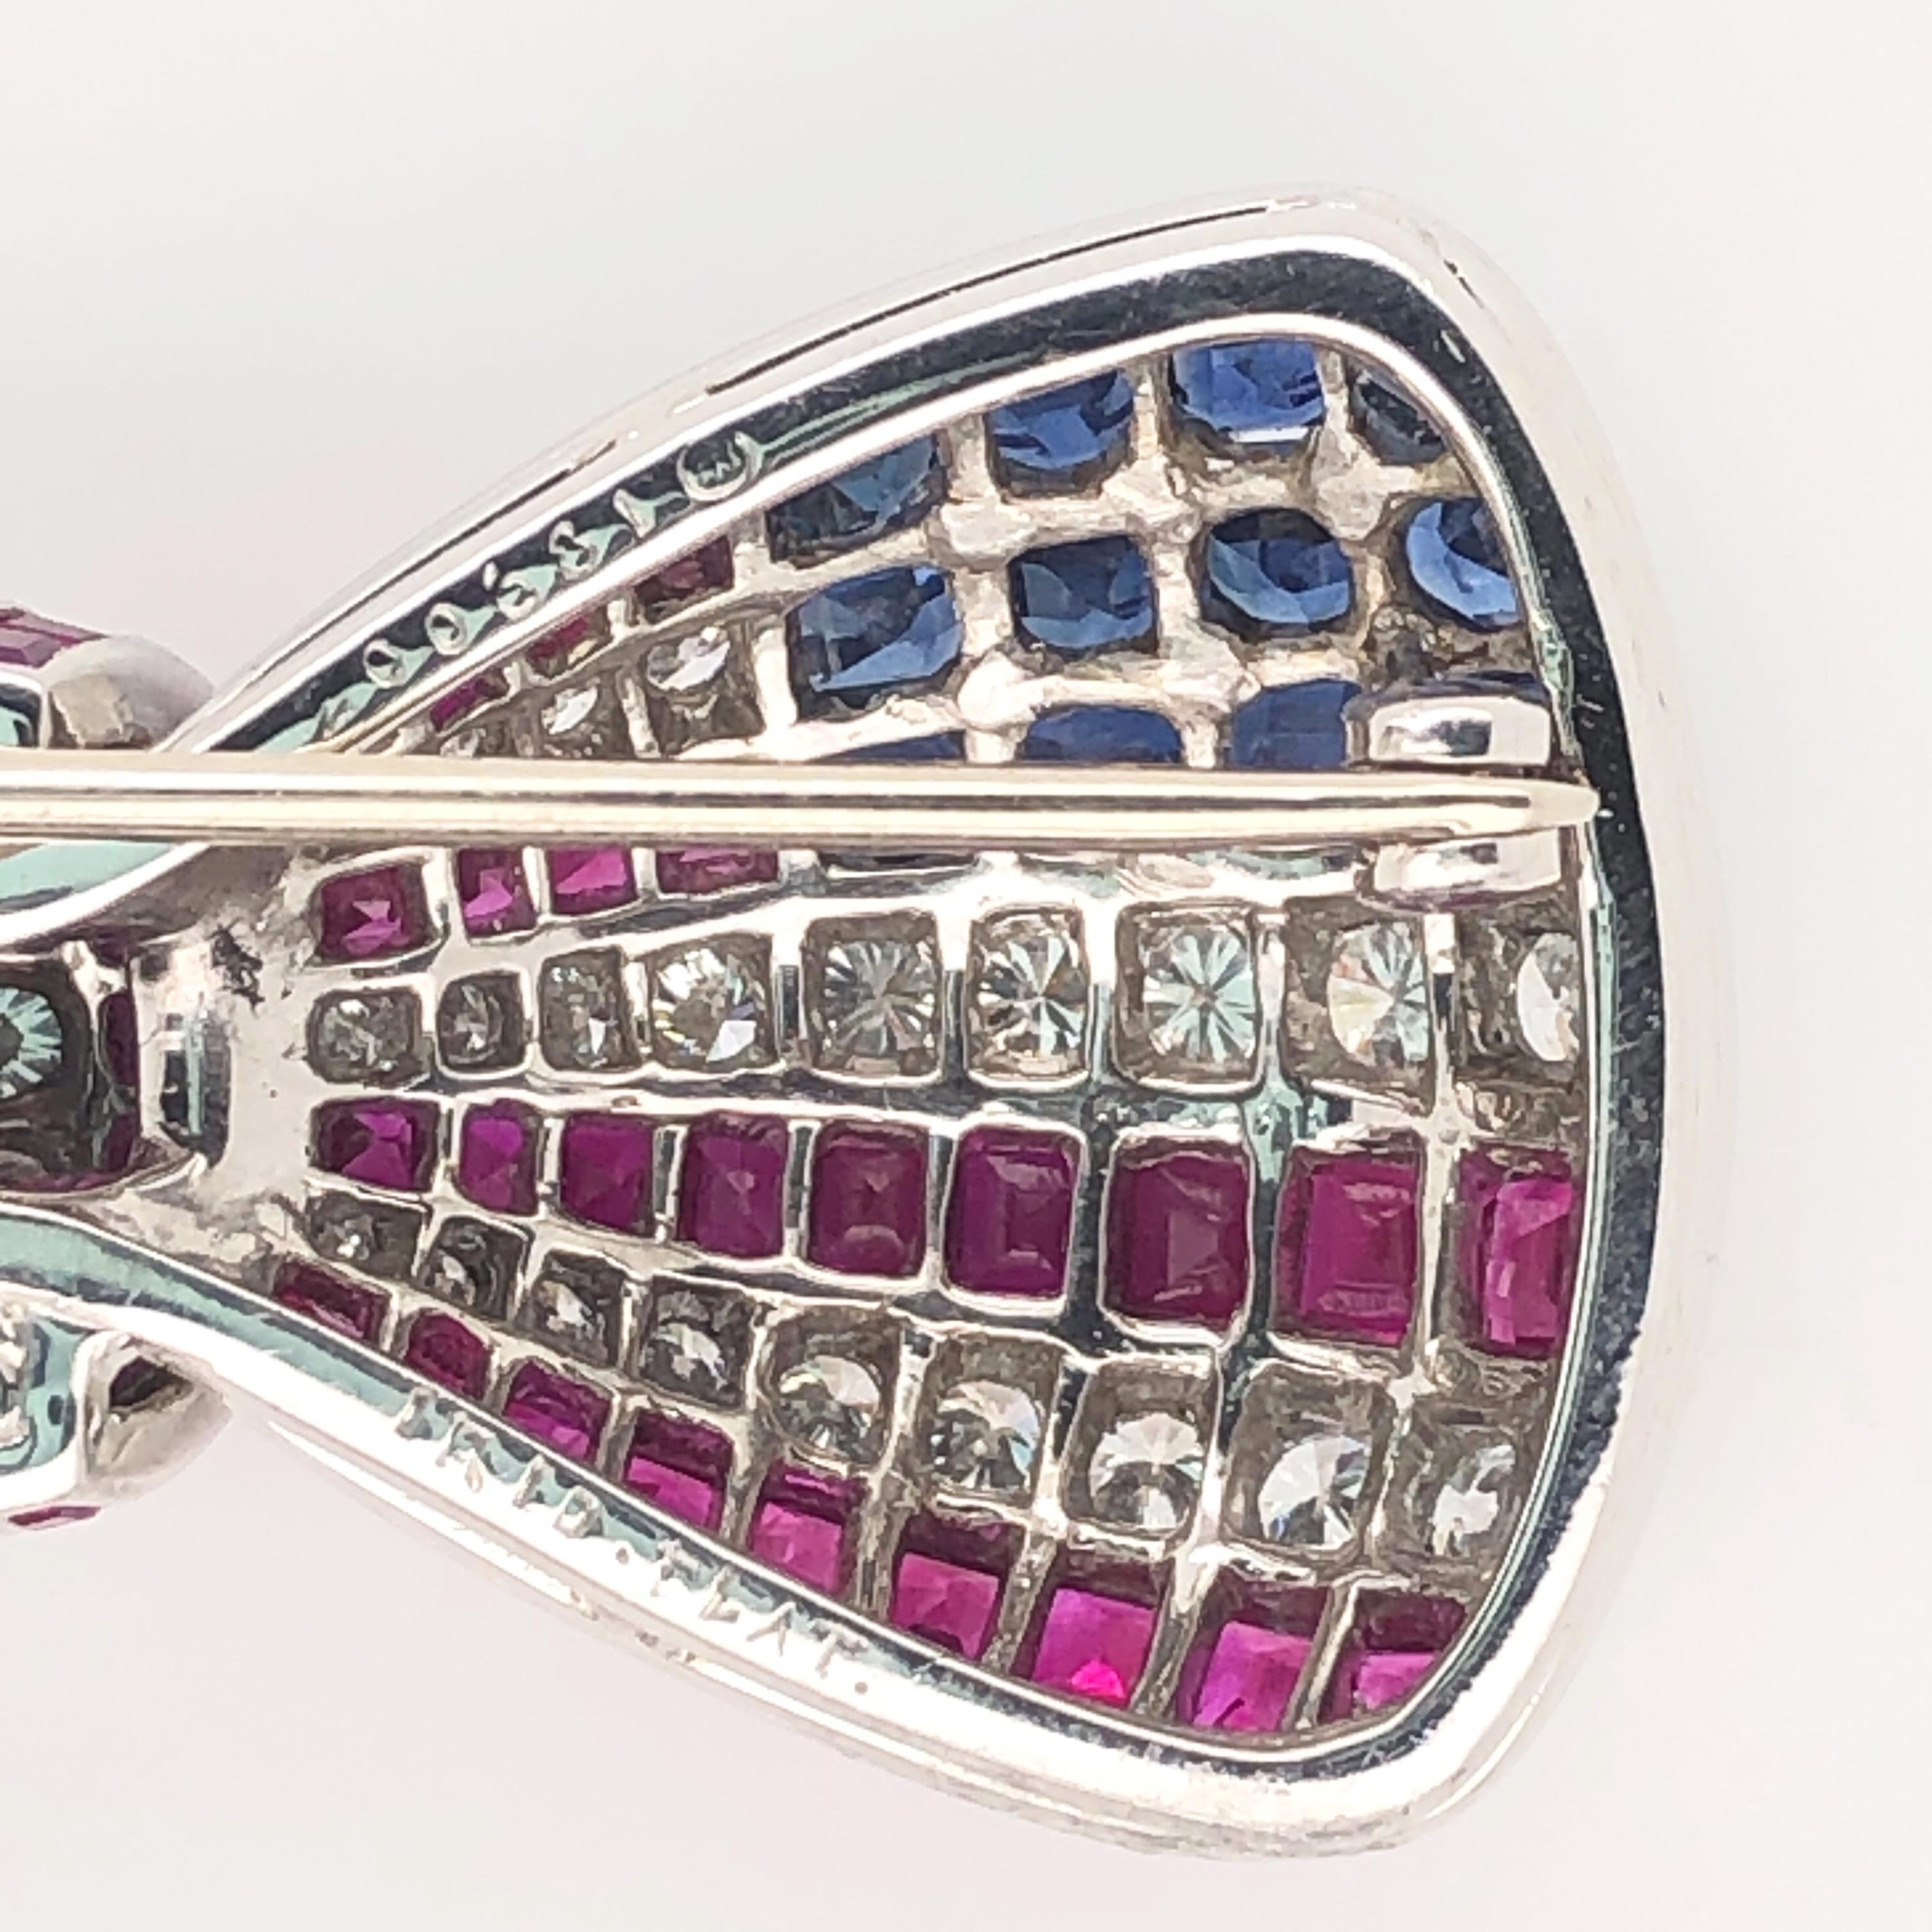 Oscar Heyman platinum American flag brooch contains rubies (6.01cts), sapphires (1.54cts) and diamonds (1.71cts). It is stamped with the makers mark, IRID PLAT, and serial number 200681.

Custom hand engraving available by request. Complimentary up